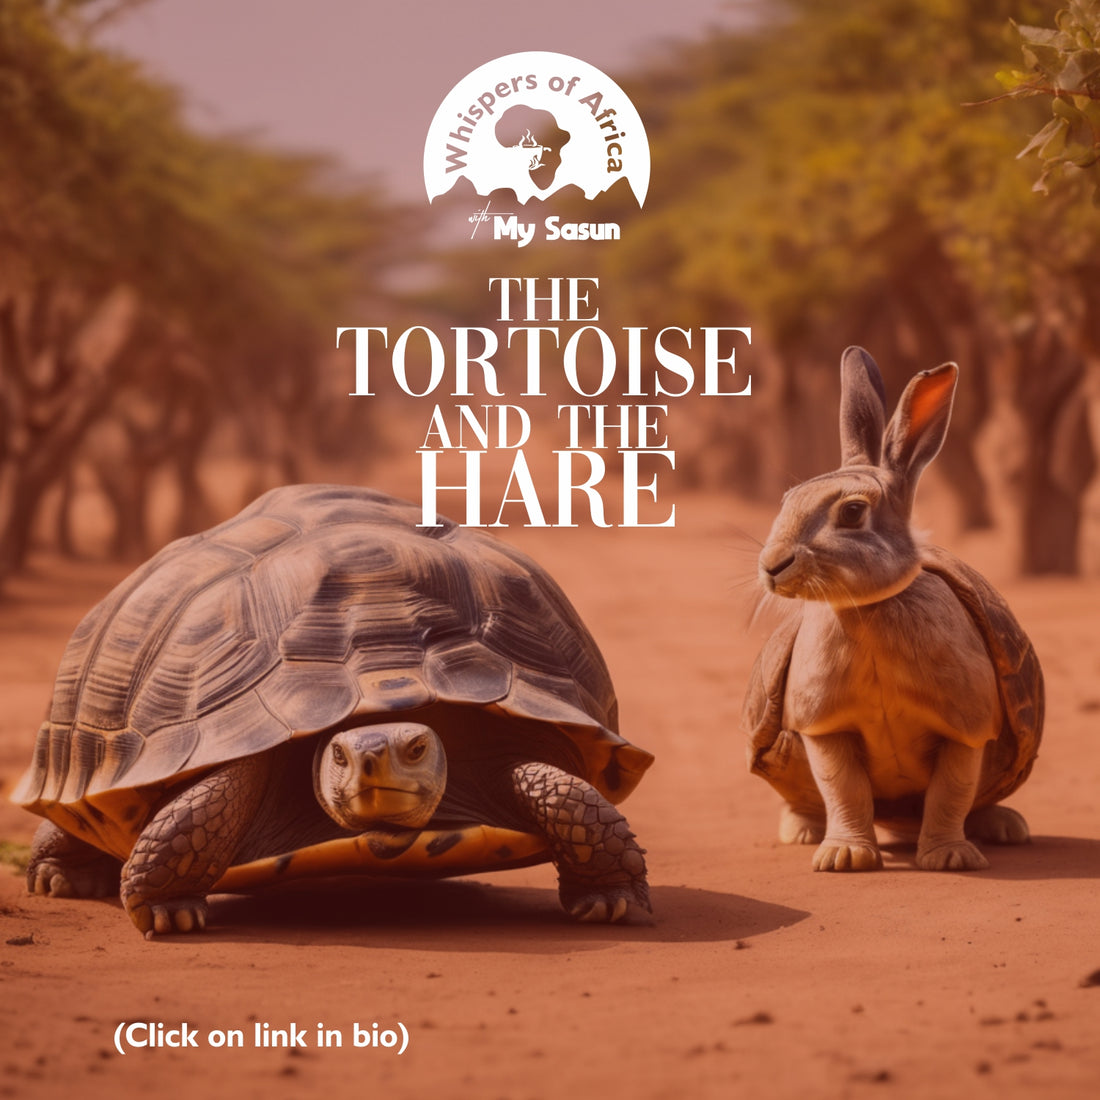 The Tortoise and the Hare Summary